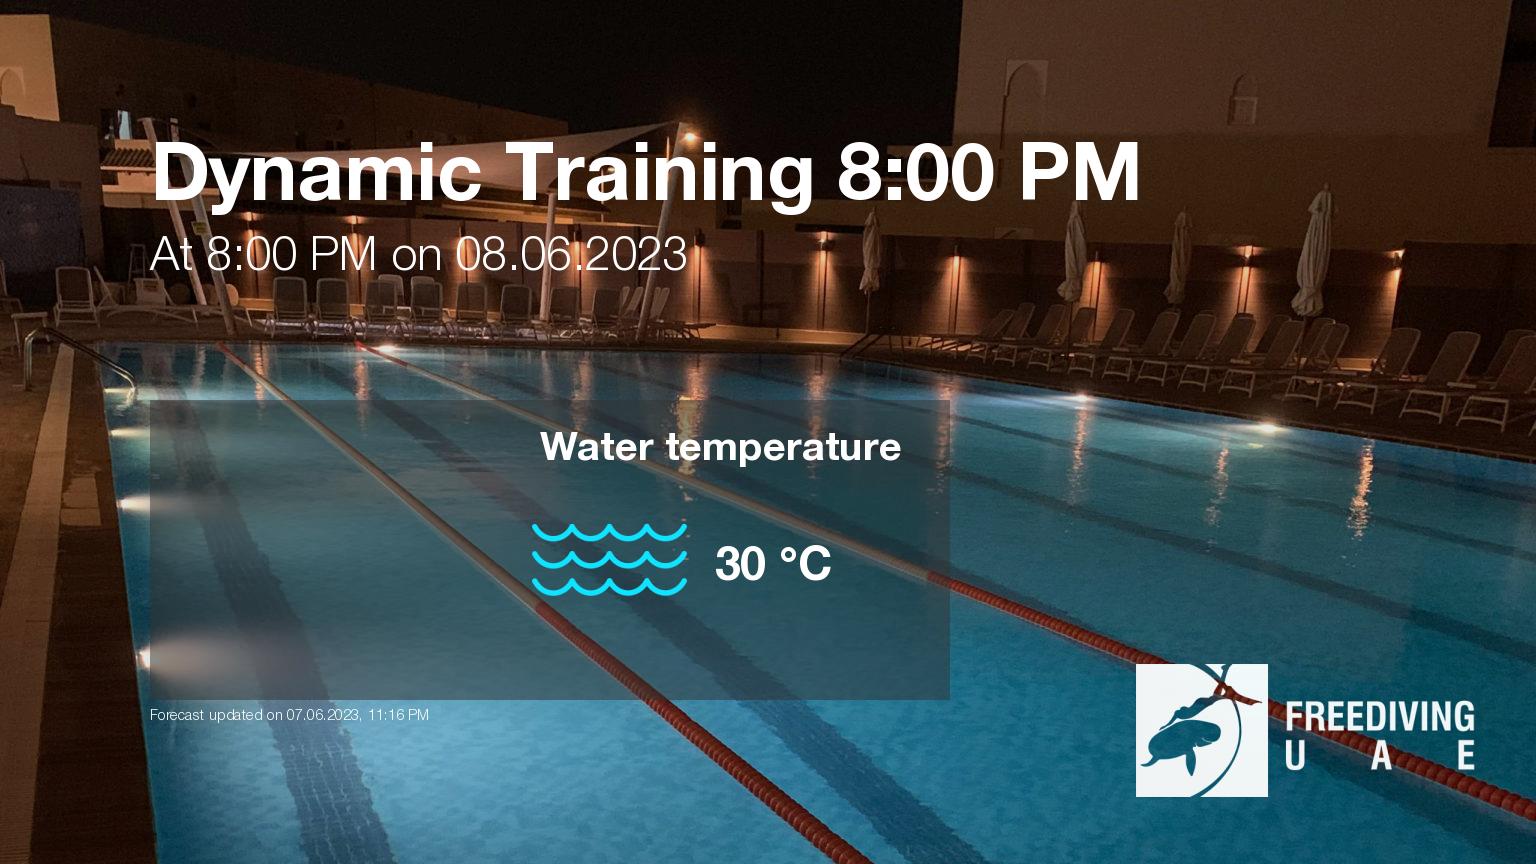 Expected weather during Dynamic Training 8:00 PM on Thu, Jun 8, at 8:00 PM